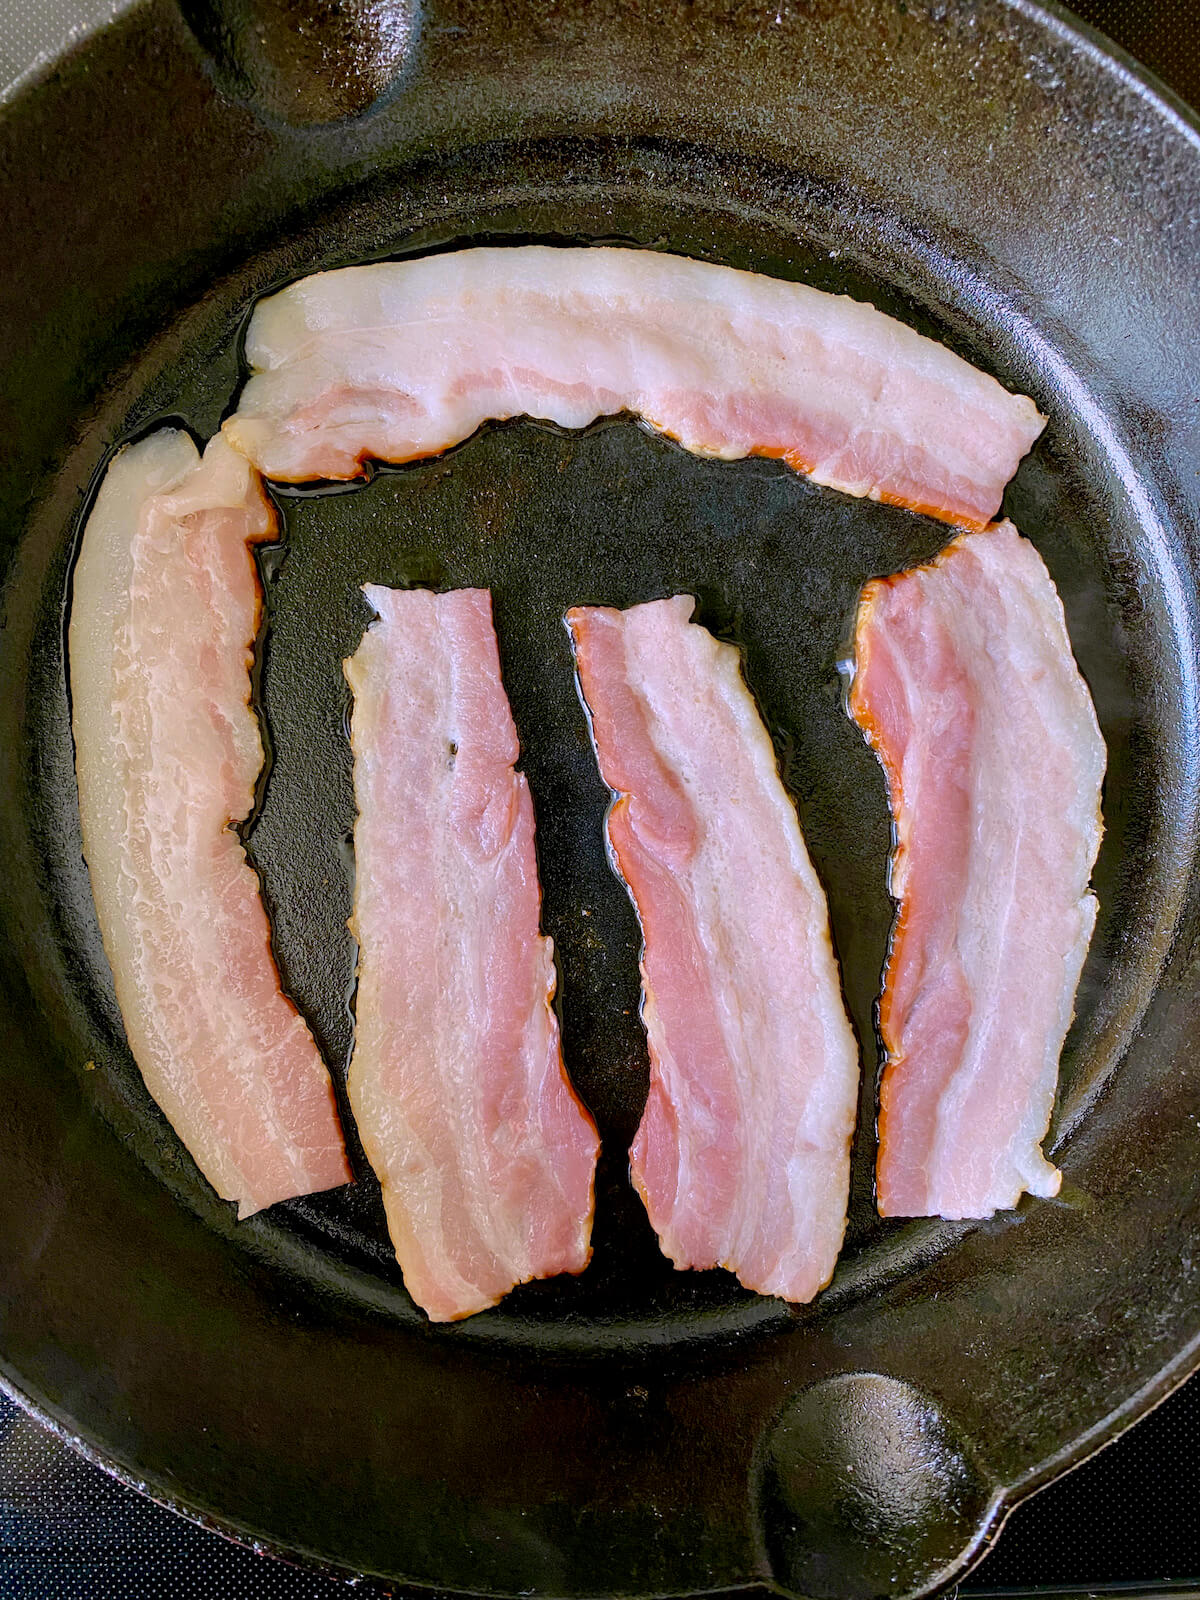 Bacon starting to cook in a cast iron skillet on the stovetop.